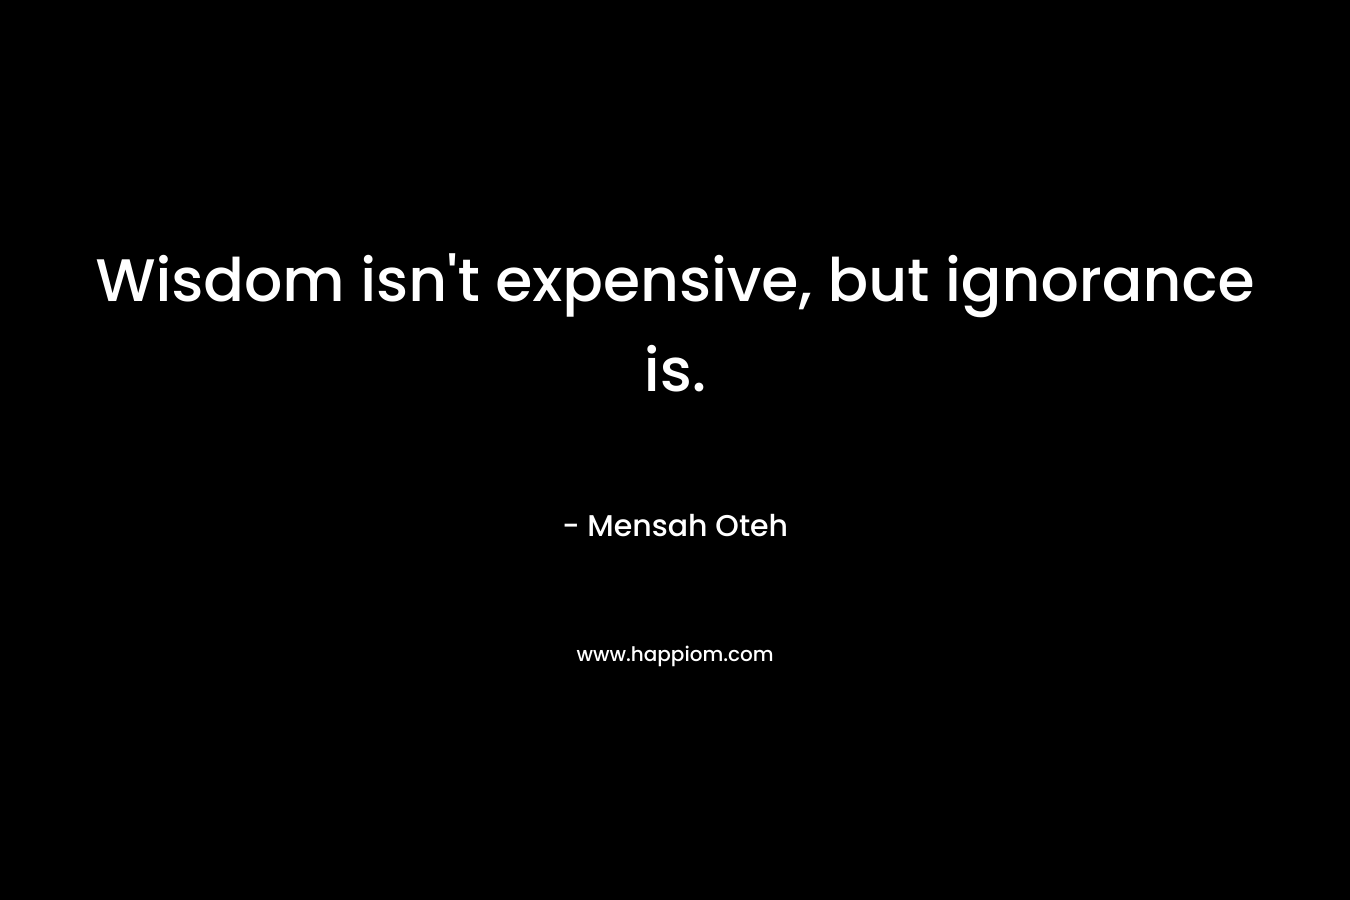 Wisdom isn't expensive, but ignorance is.